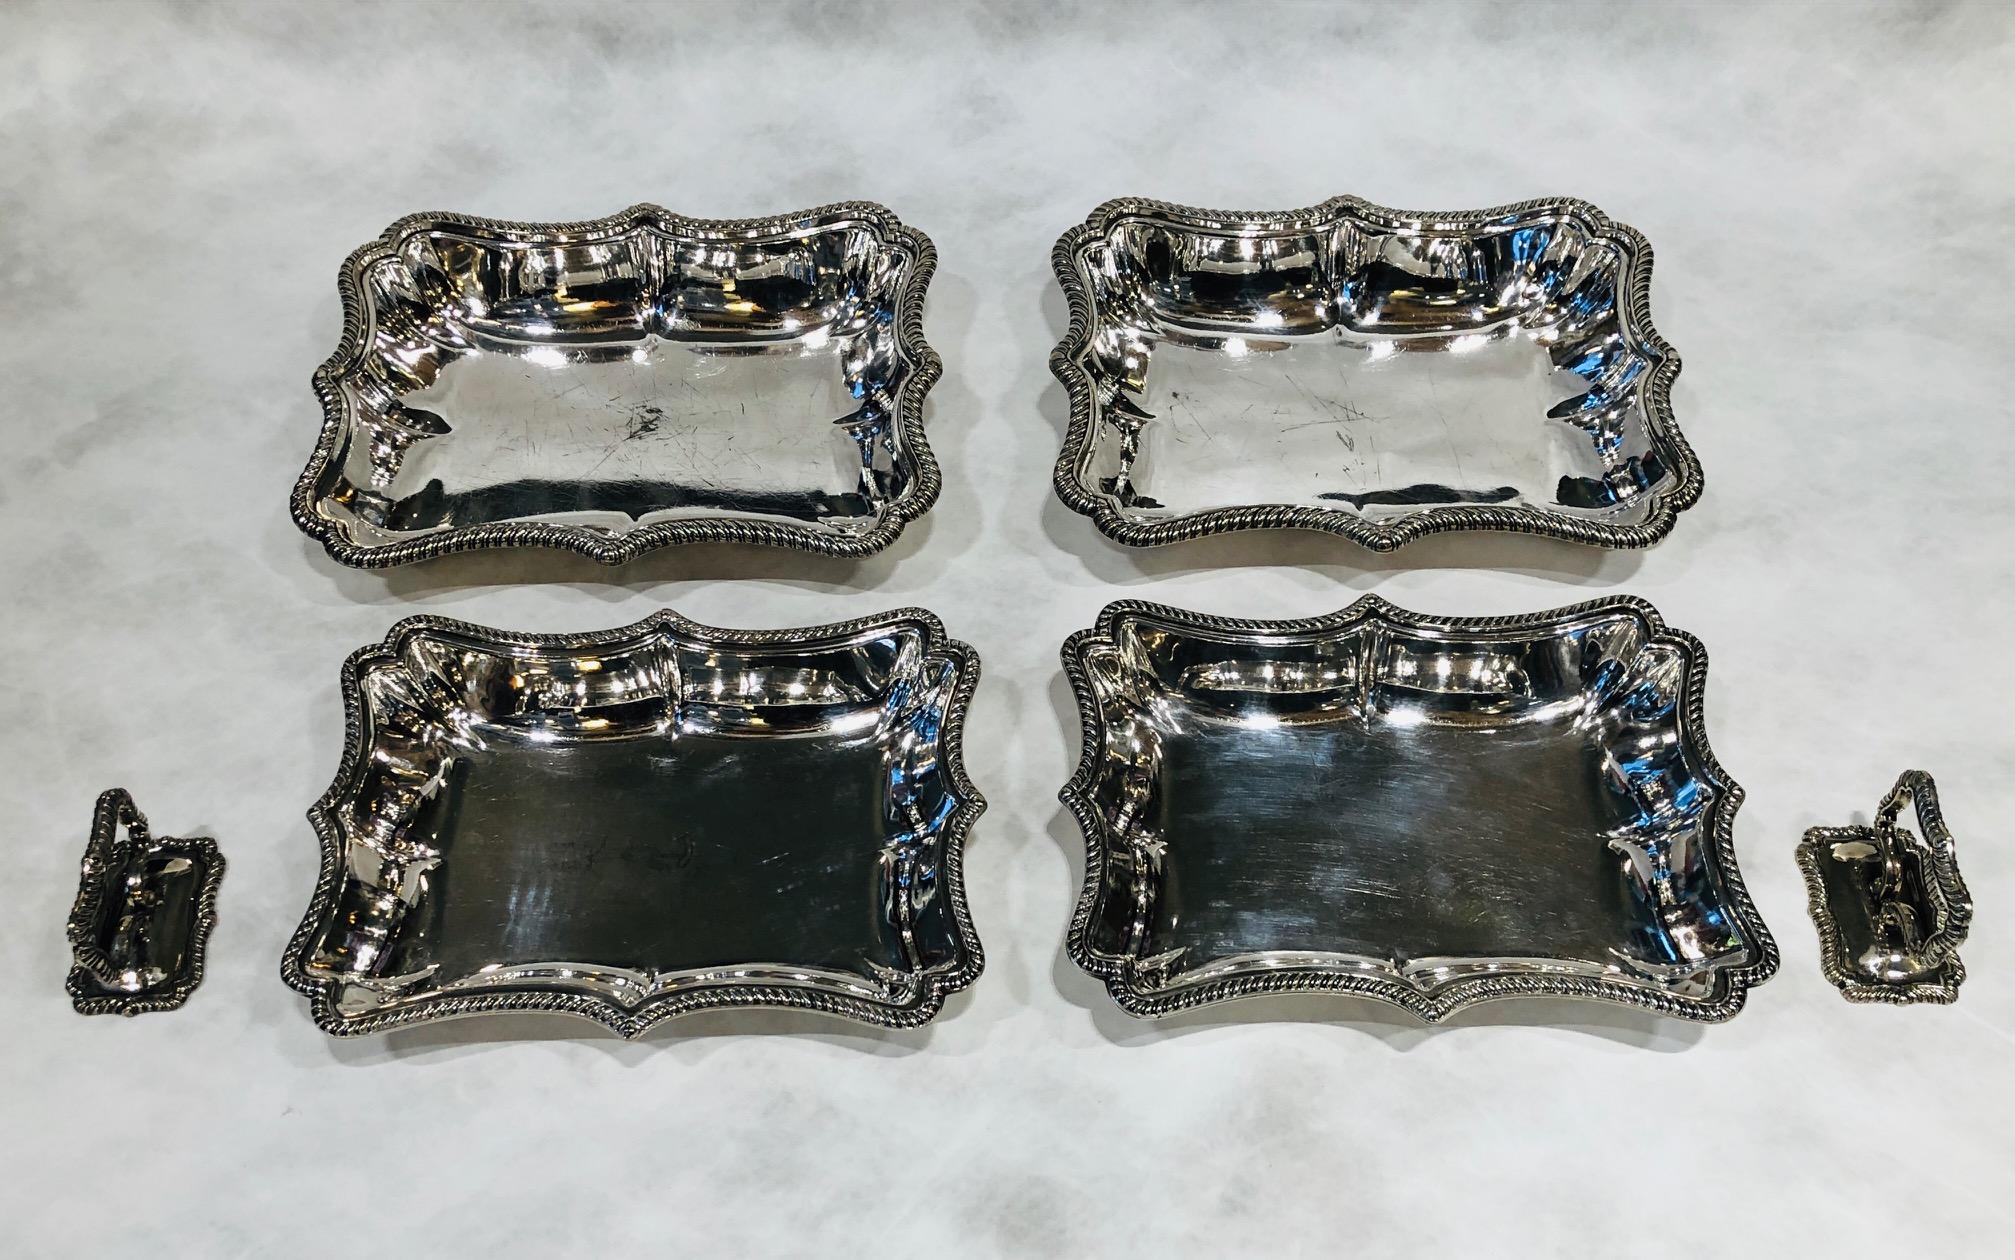 Late Victorian Alexander Clark Silver Plated Entree Dish, Set UK, circa 1890s